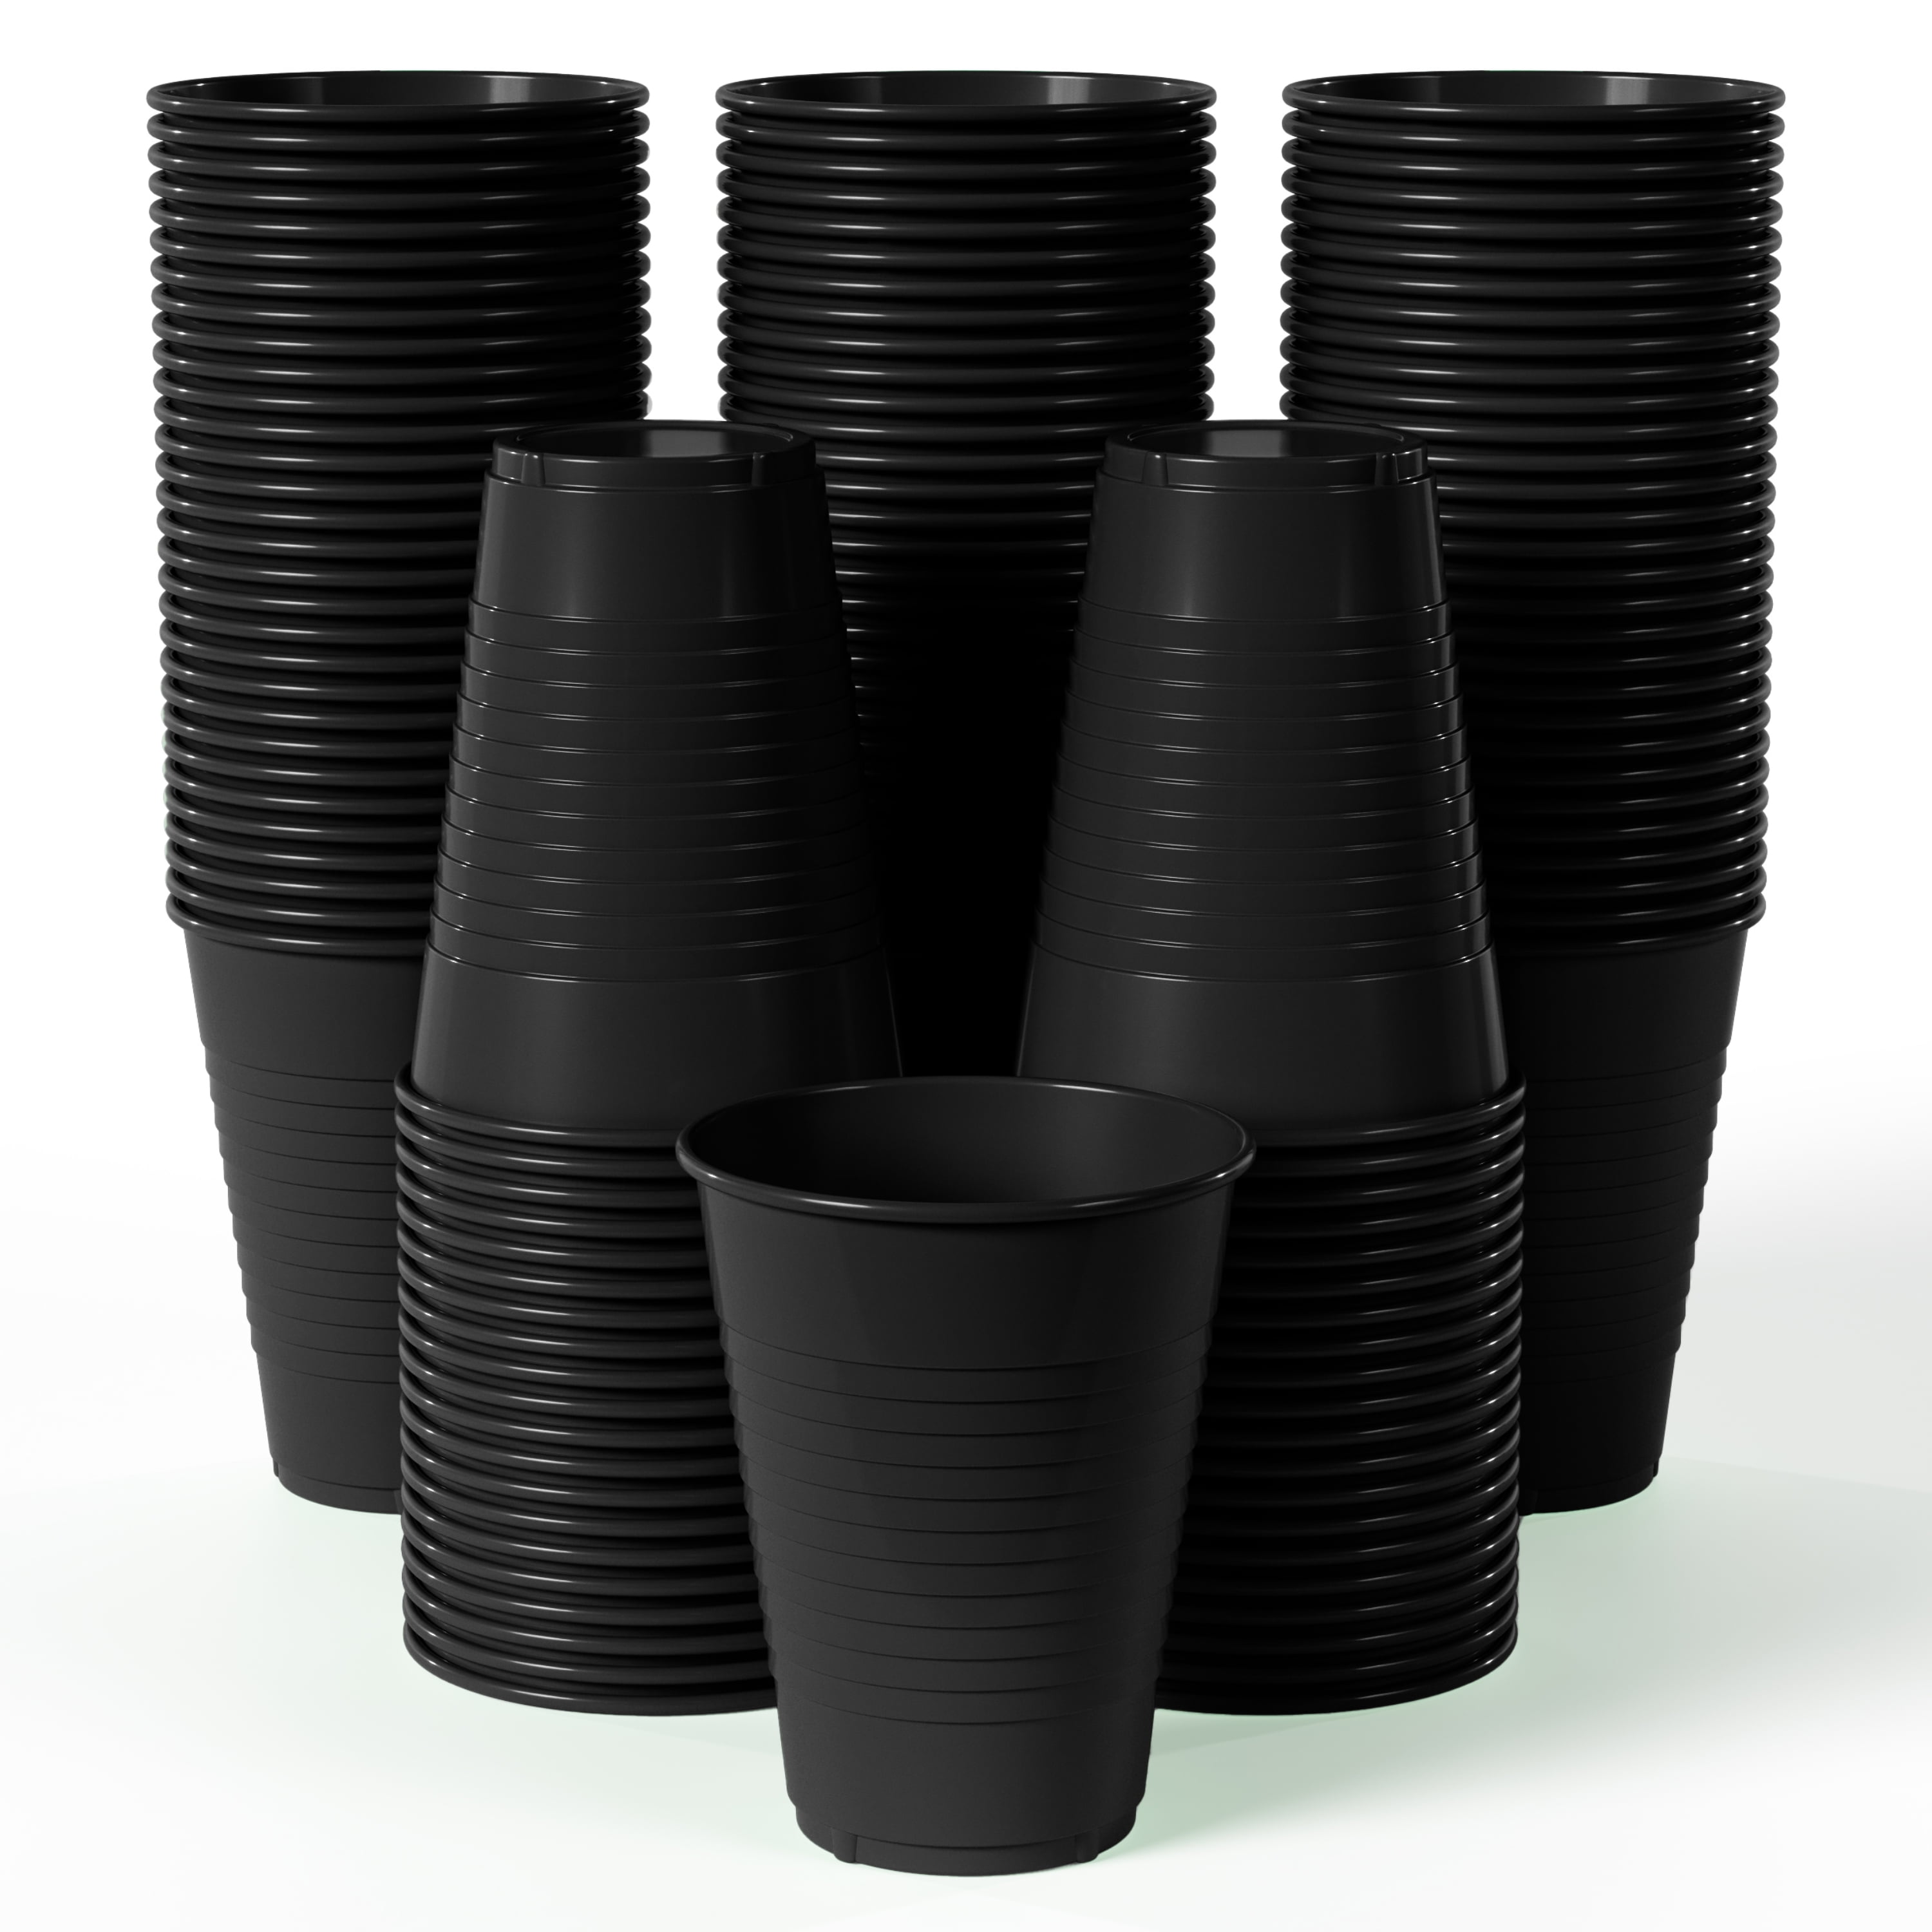 Solid Color Plastic Cups - 50 Ct.